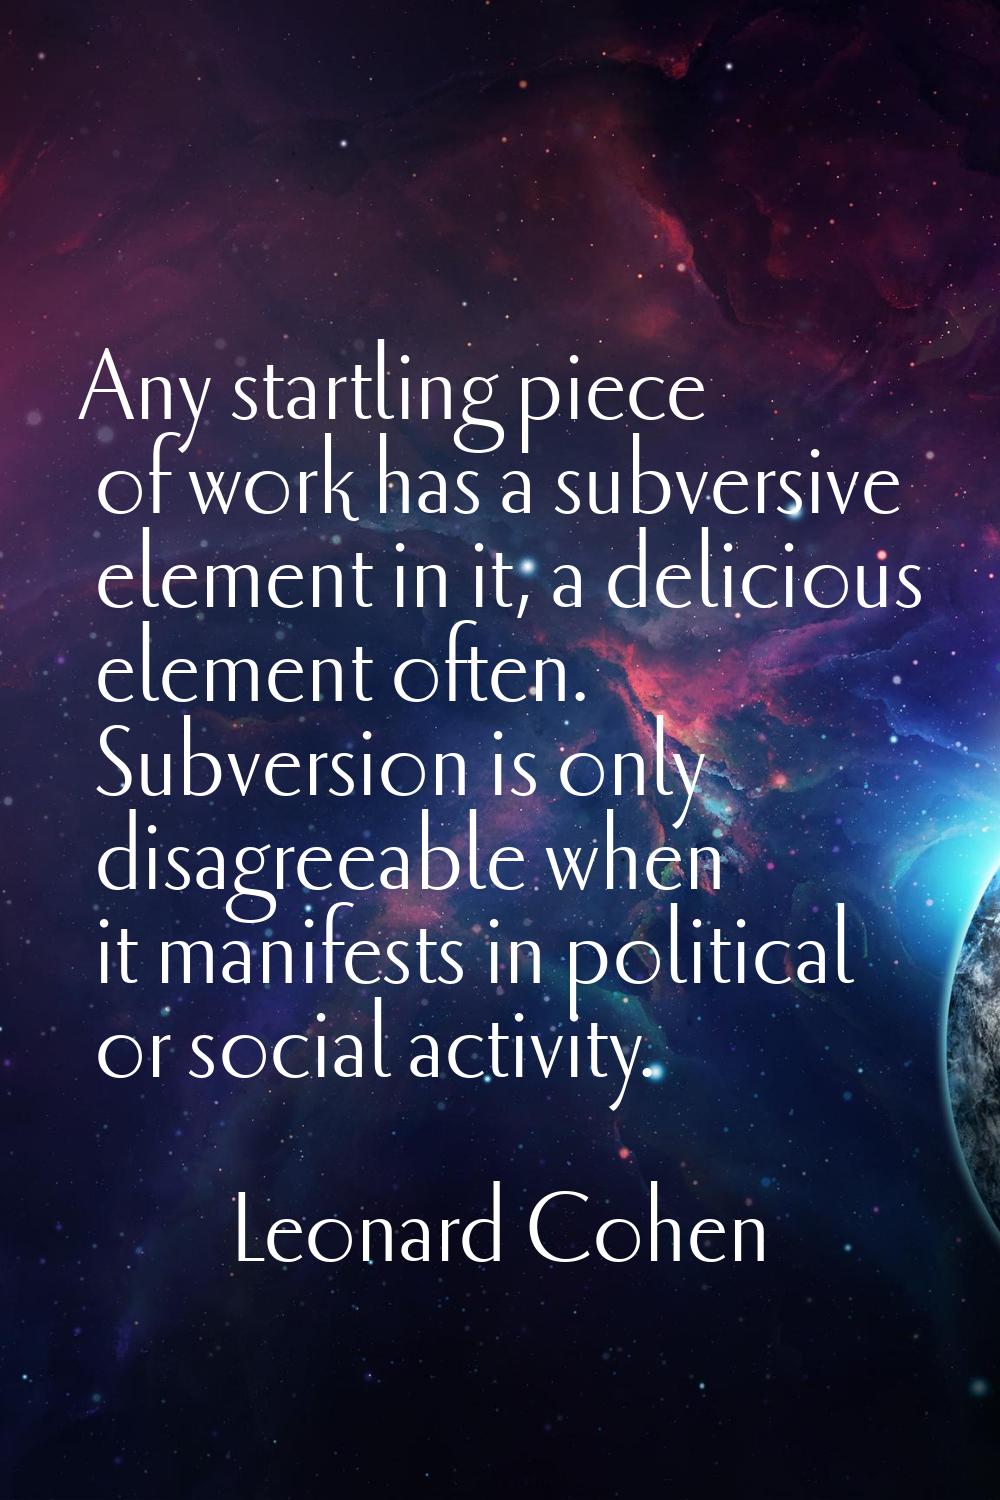 Any startling piece of work has a subversive element in it, a delicious element often. Subversion i